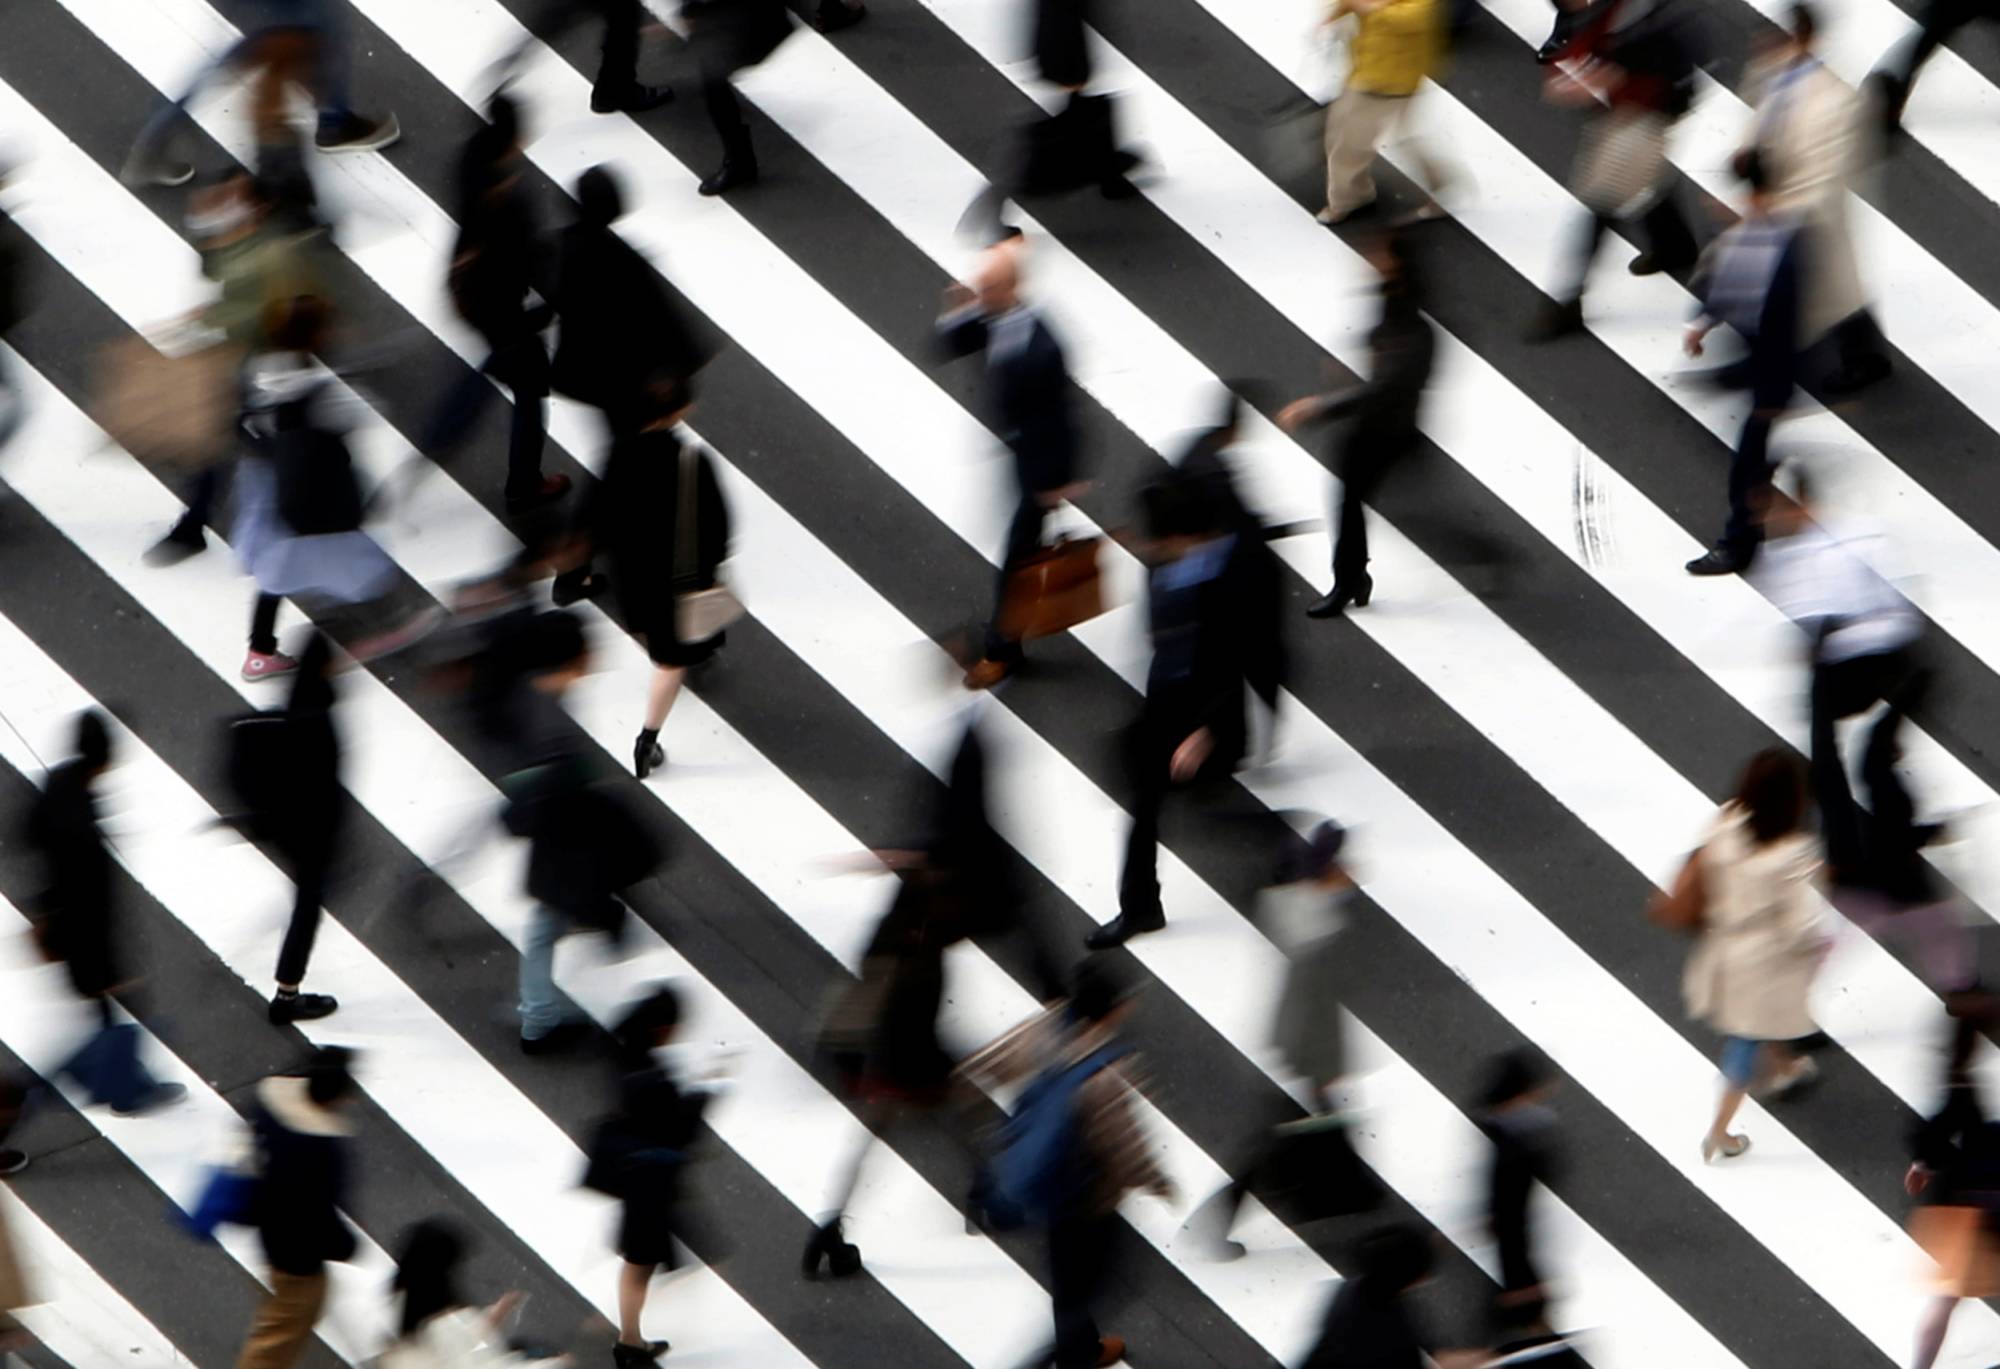 Japan’s stubbornly static wages have been one of the greatest mysteries in the nation’s shrinking labor market. | REUTERS